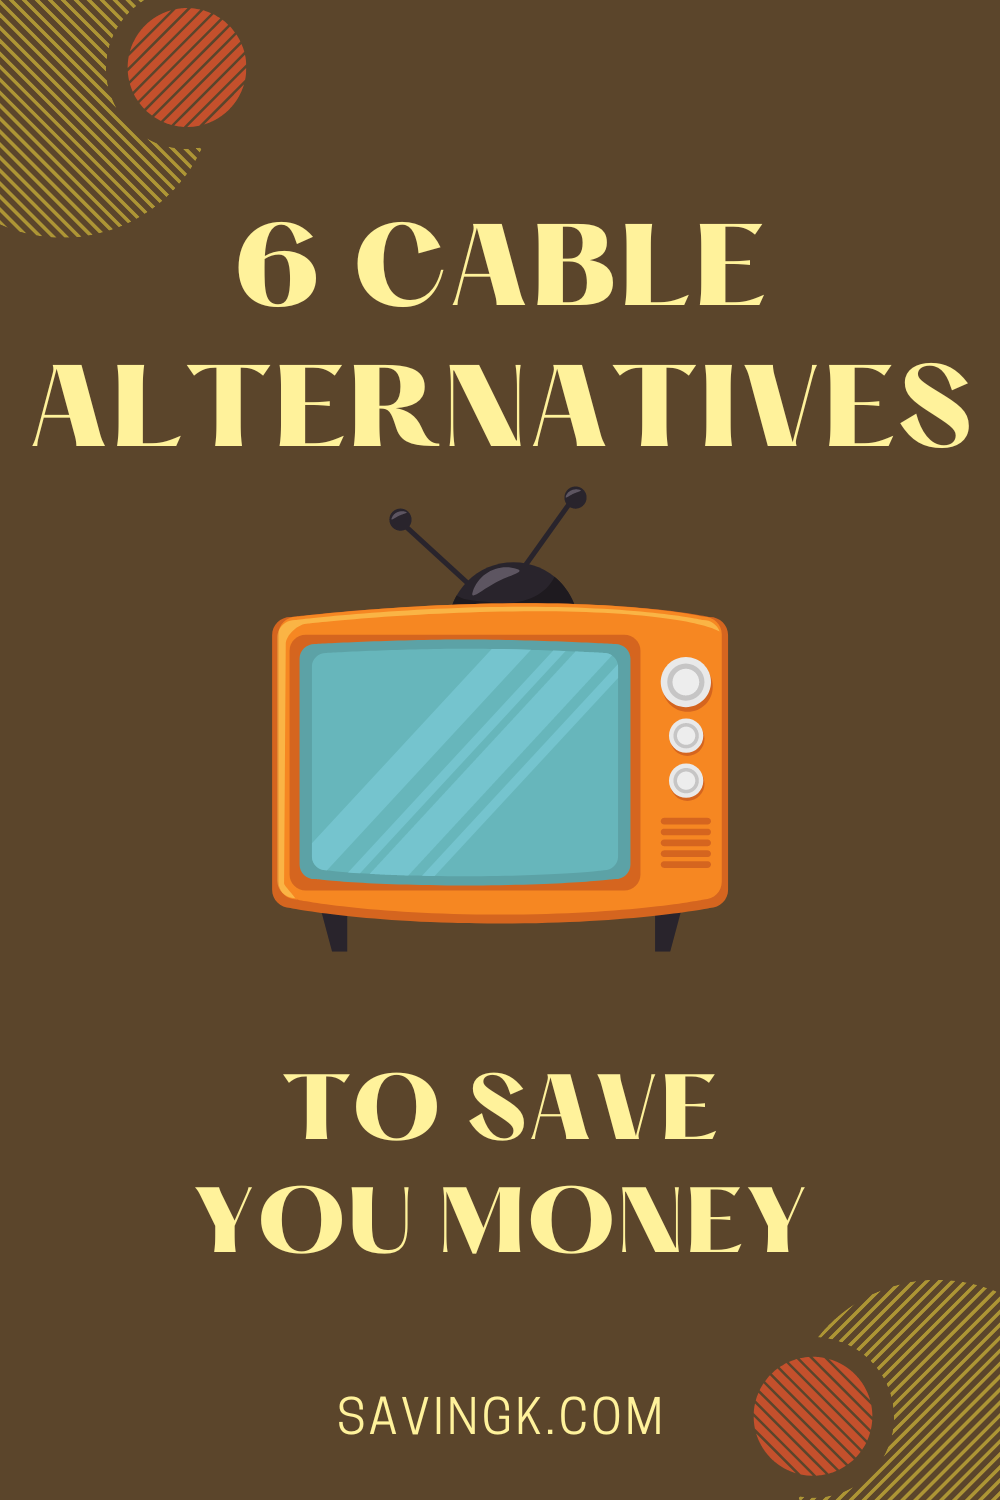 Cable Alternatives